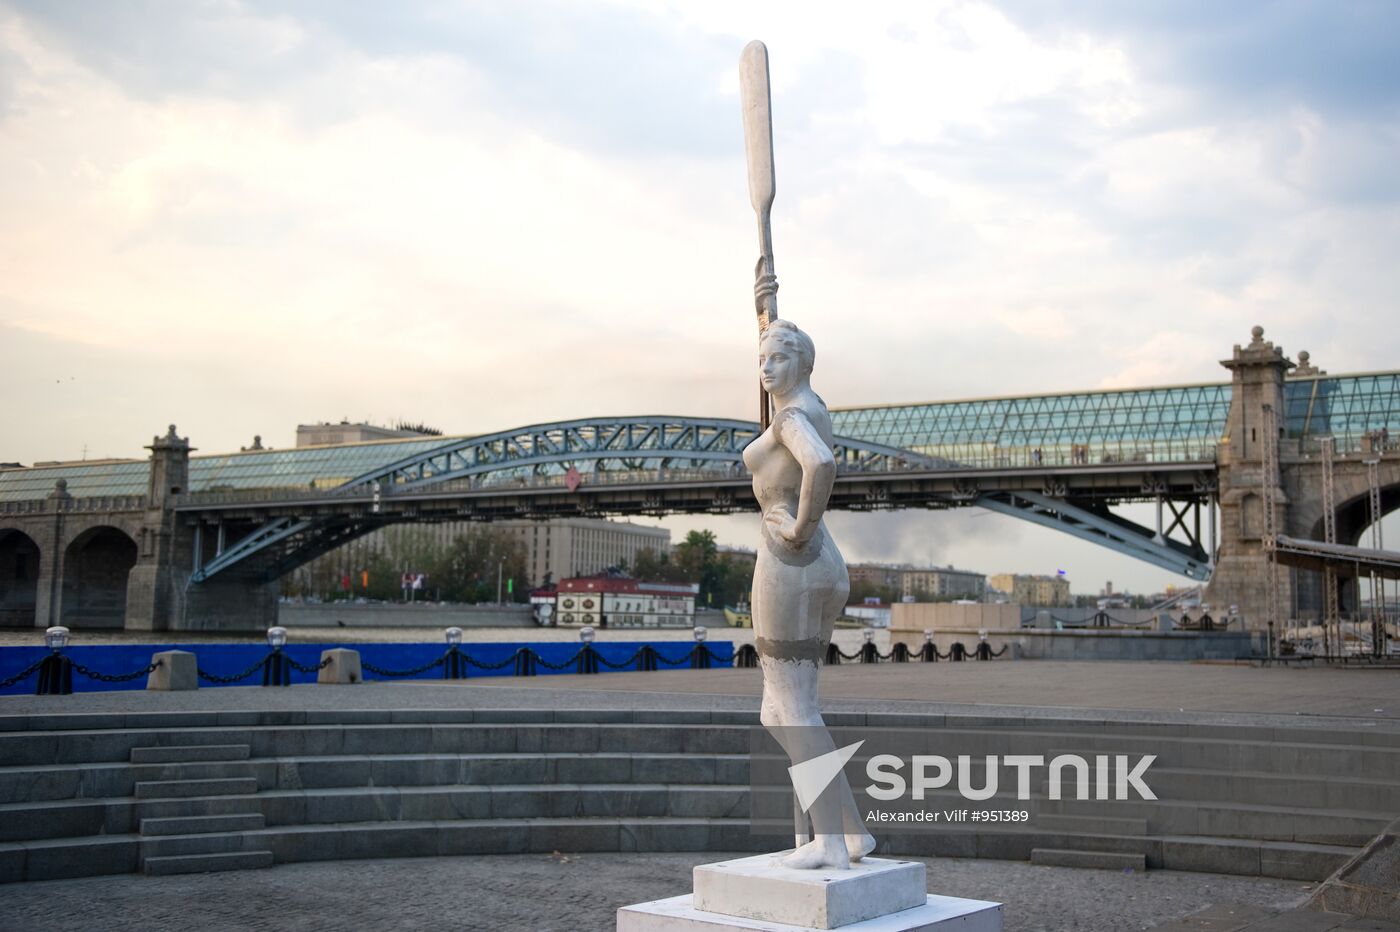 Sculpture "Girl with a paddle" returned to Gorky Park